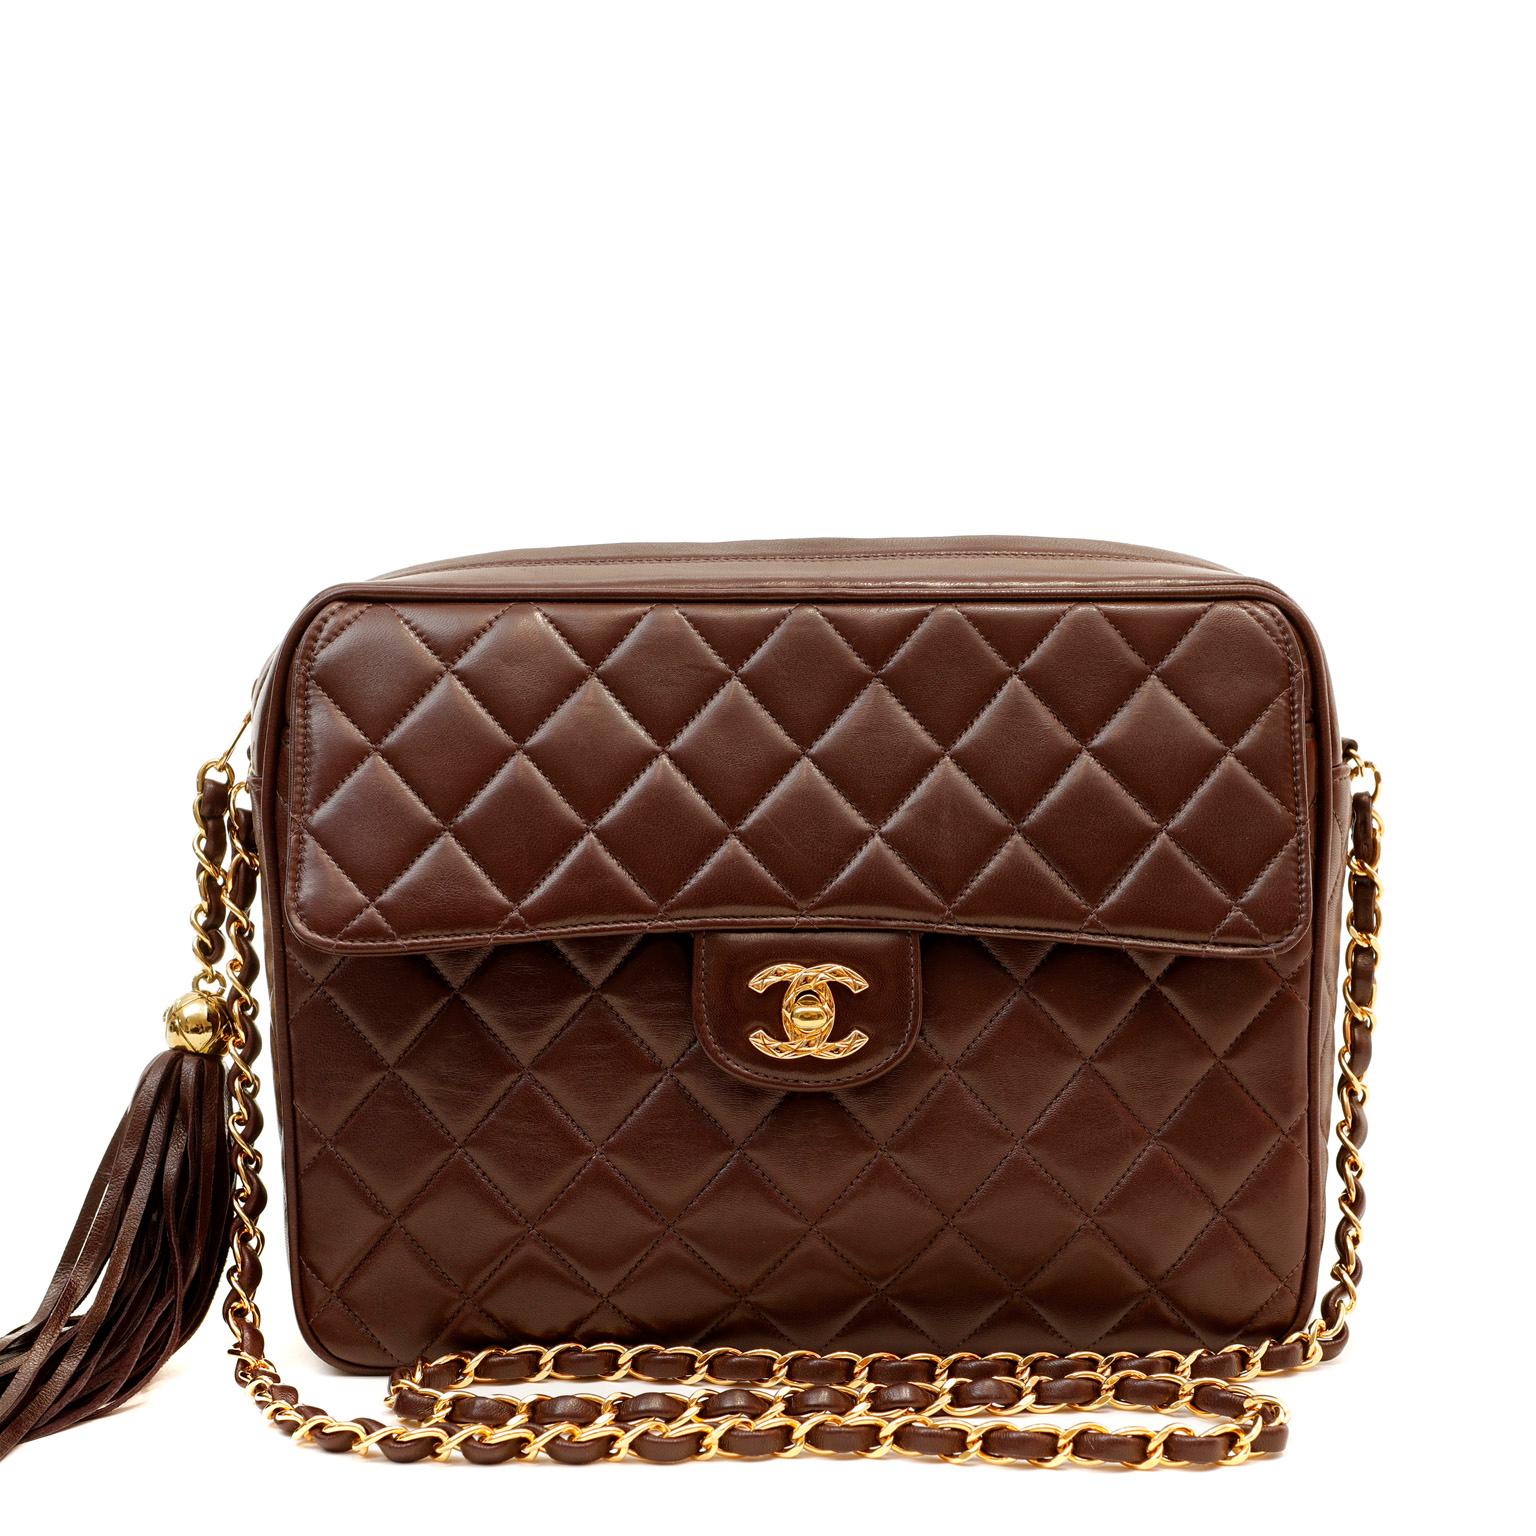 This authentic Chanel Brown Lambskin Vintage Camera Bag is in excellent plus condition.  A beautiful timeless classic, this is a must have for any collection. Rich chocolate brown lambskin is quilted in signature Chanel diamond pattern.  Gold